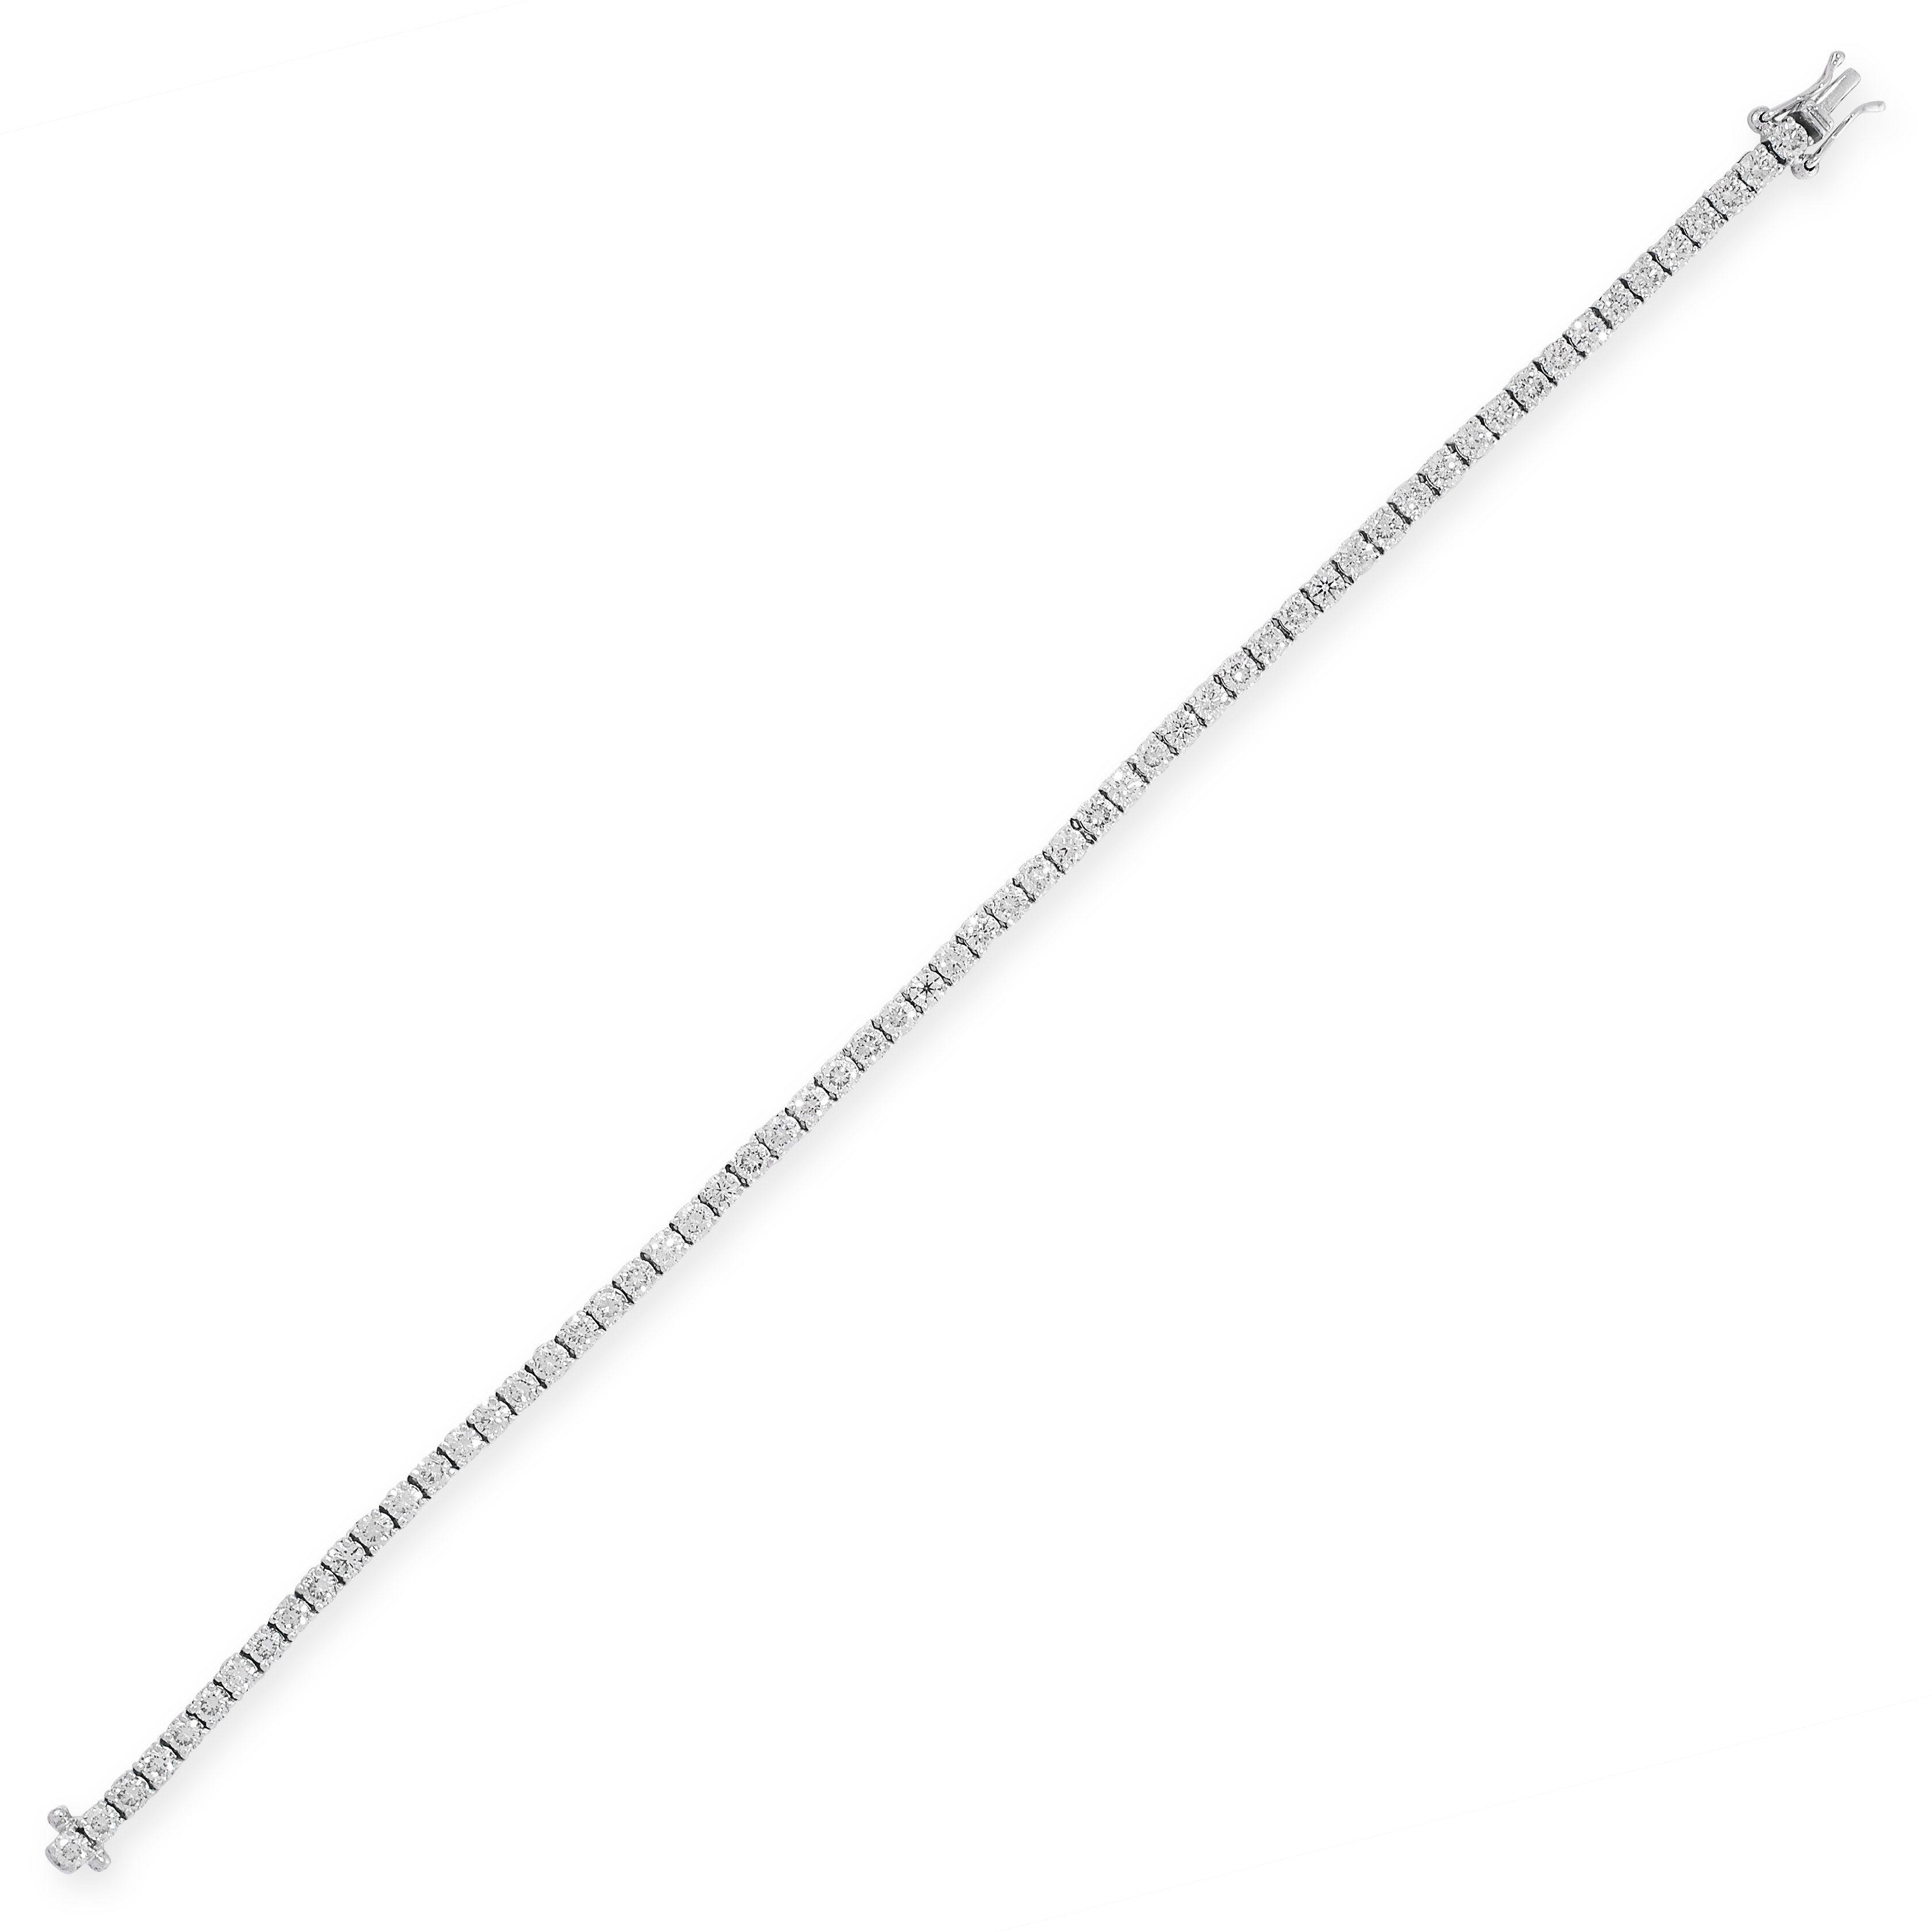 A DIAMOND LINE BRACELET in 18ct white goldd, comprising a single row of sixty-one round cut